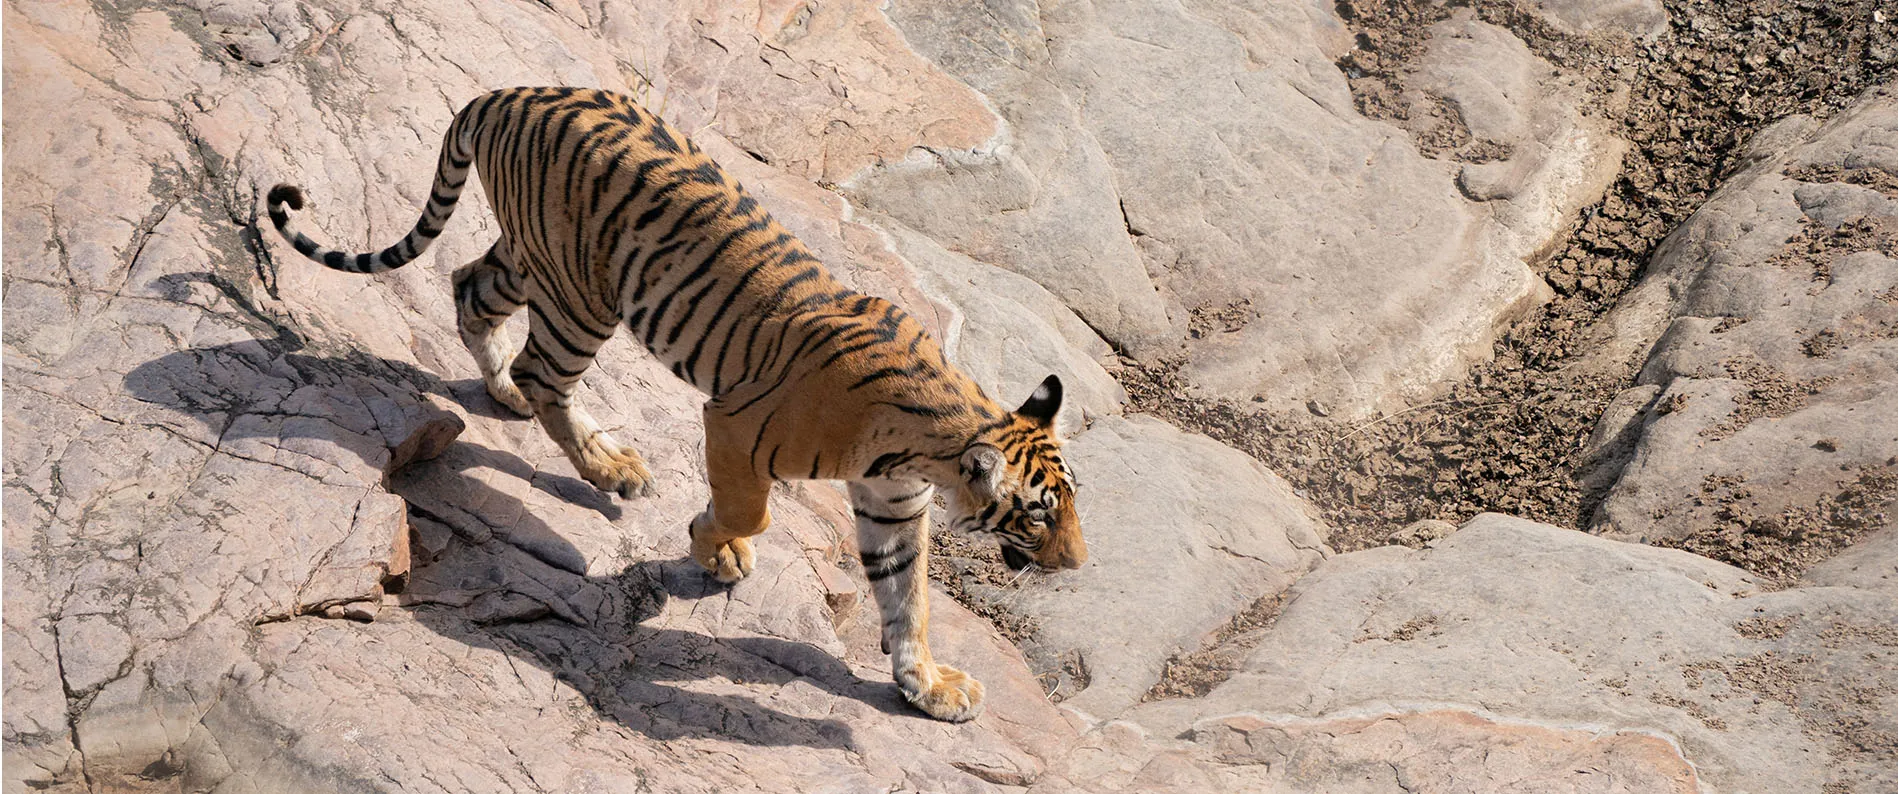 The executive of Eye of the Tiger captures the tiger walking on the rocks of Ranthambore. Get best Ranthambore safari package